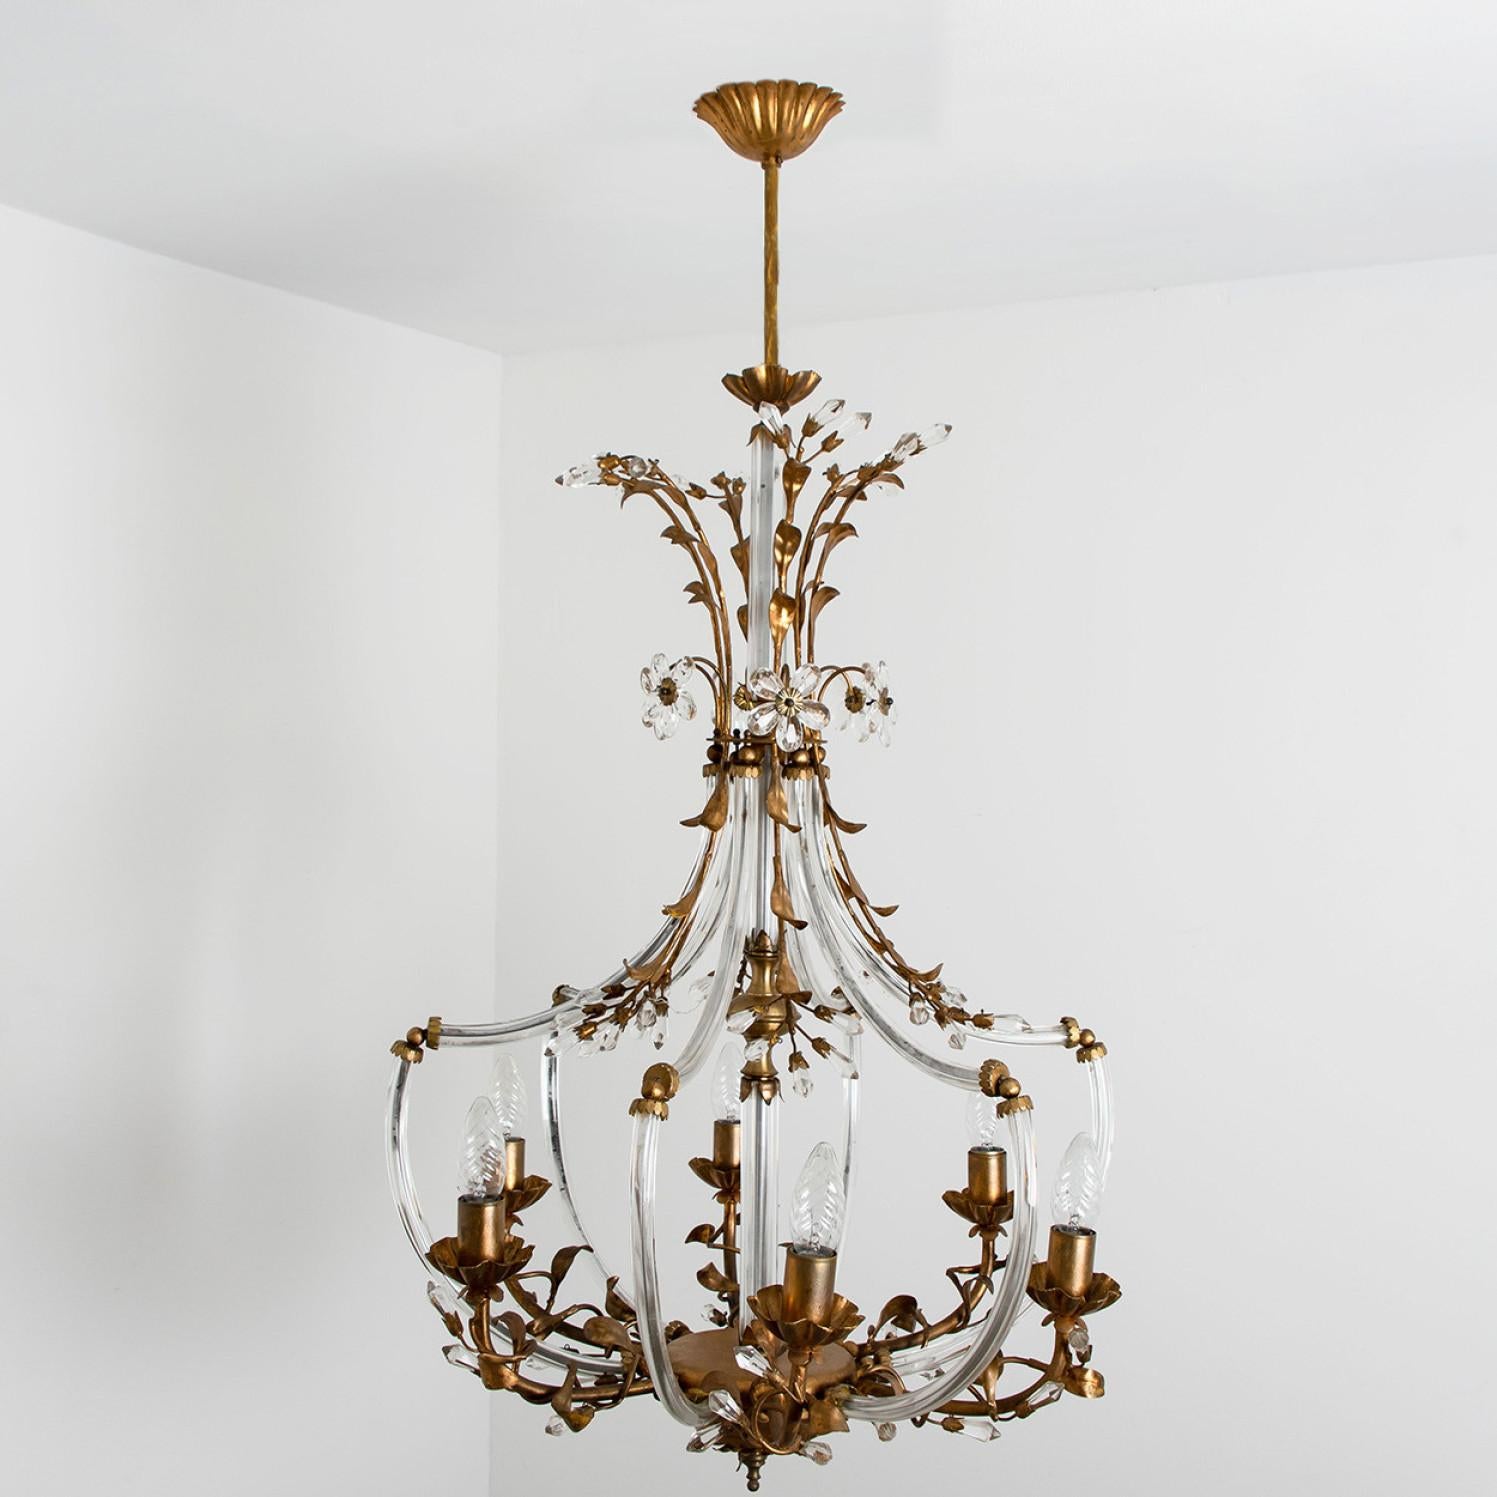 Elegant crystal glass tear drop 6-light chandelier by Palwa, Germany. Wonderful light effect due to lovely glass elements.

Measures: Diameter circa 23.62 inch (60 cm), overall height circa 45.28 inch (115 cm). Chain can be adjusted as required,